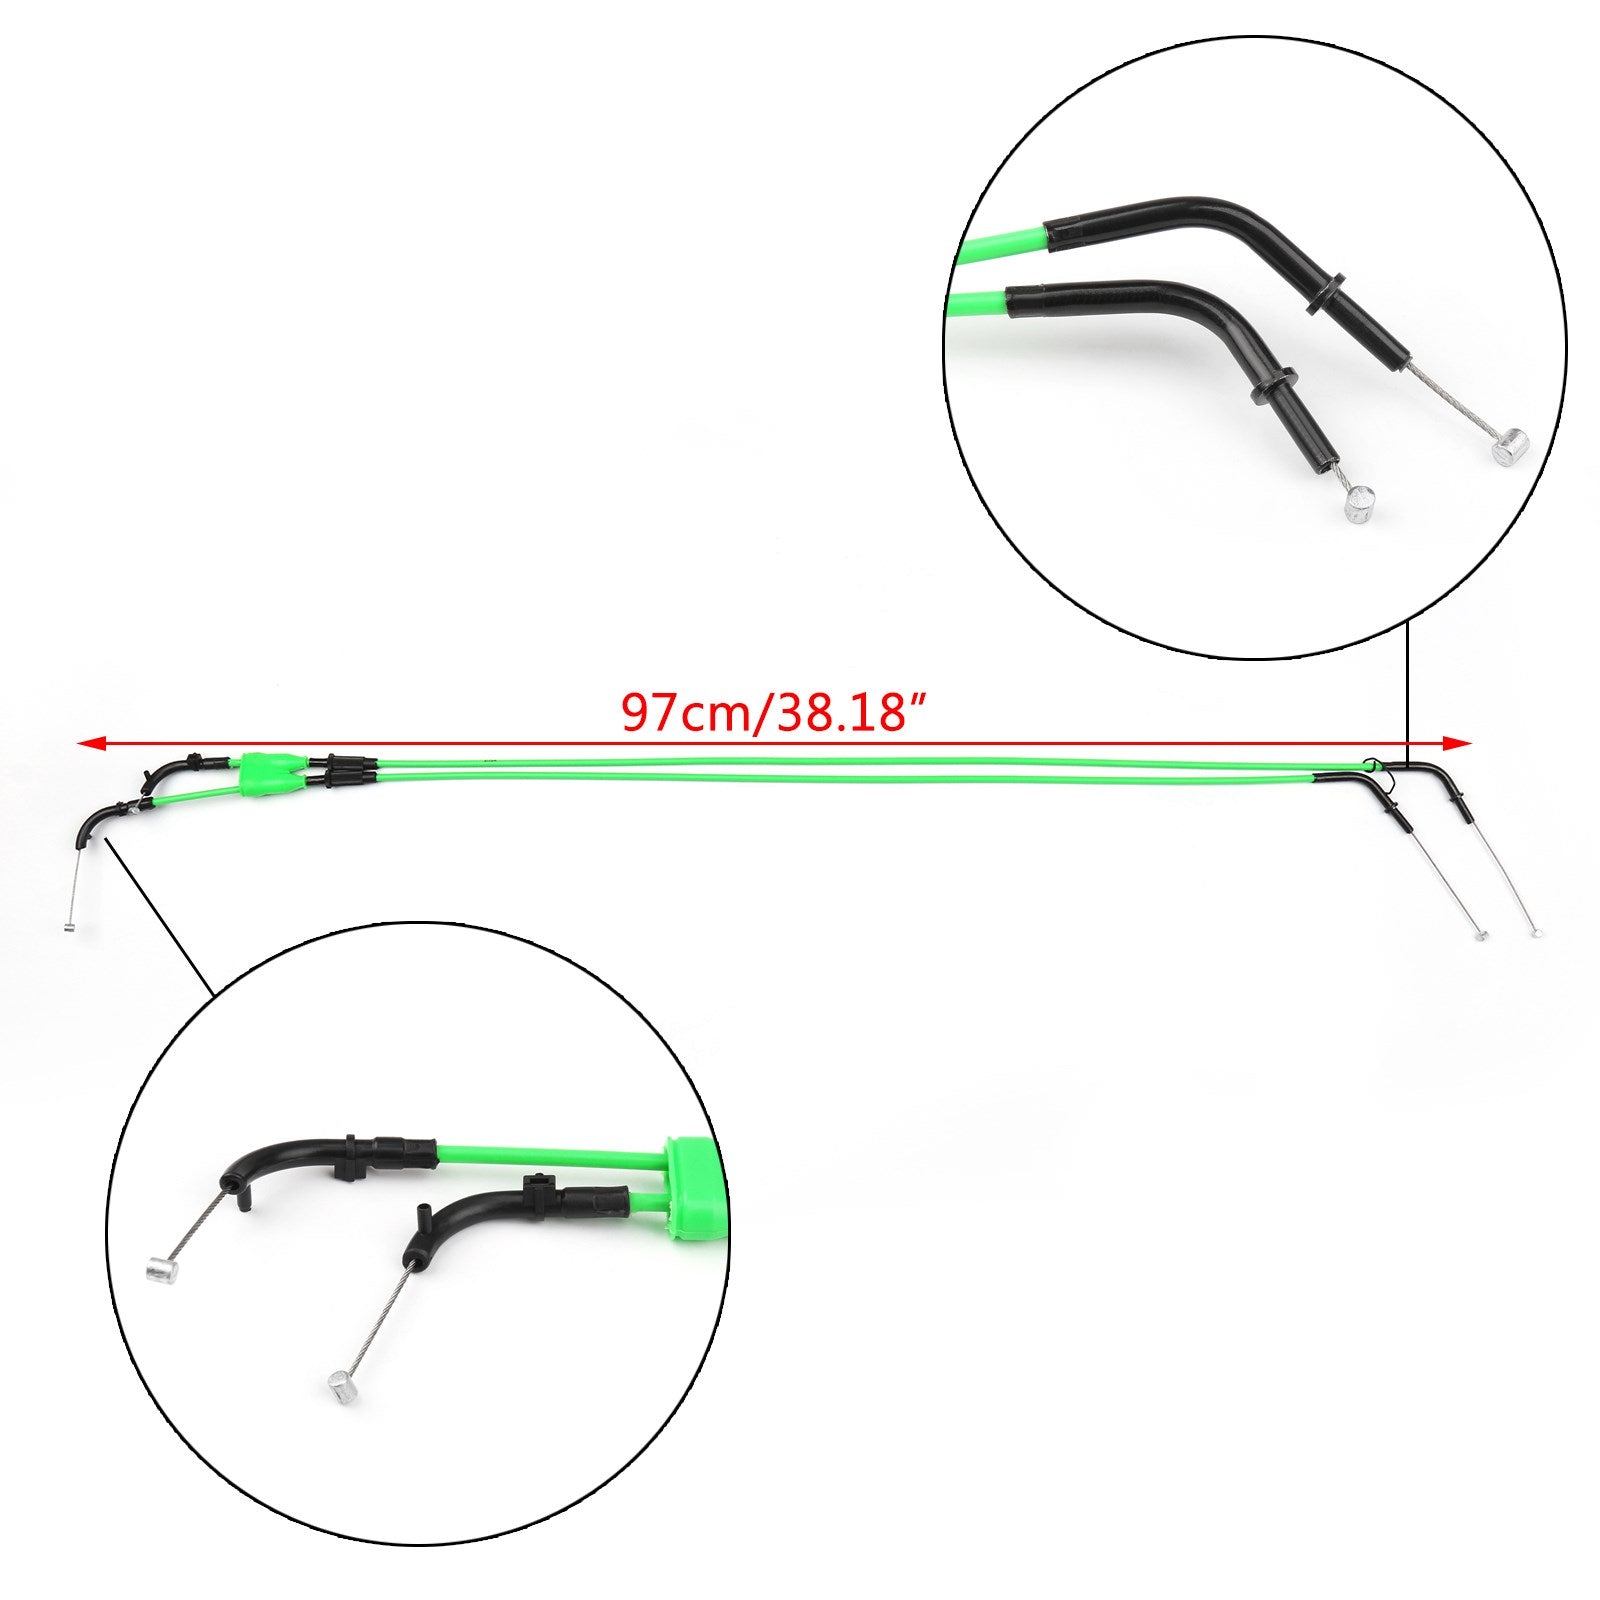 Motorcycle Throttle Cable Wire For Kawasaki Ninja ZX6R ZX600P 2007 2008 Green